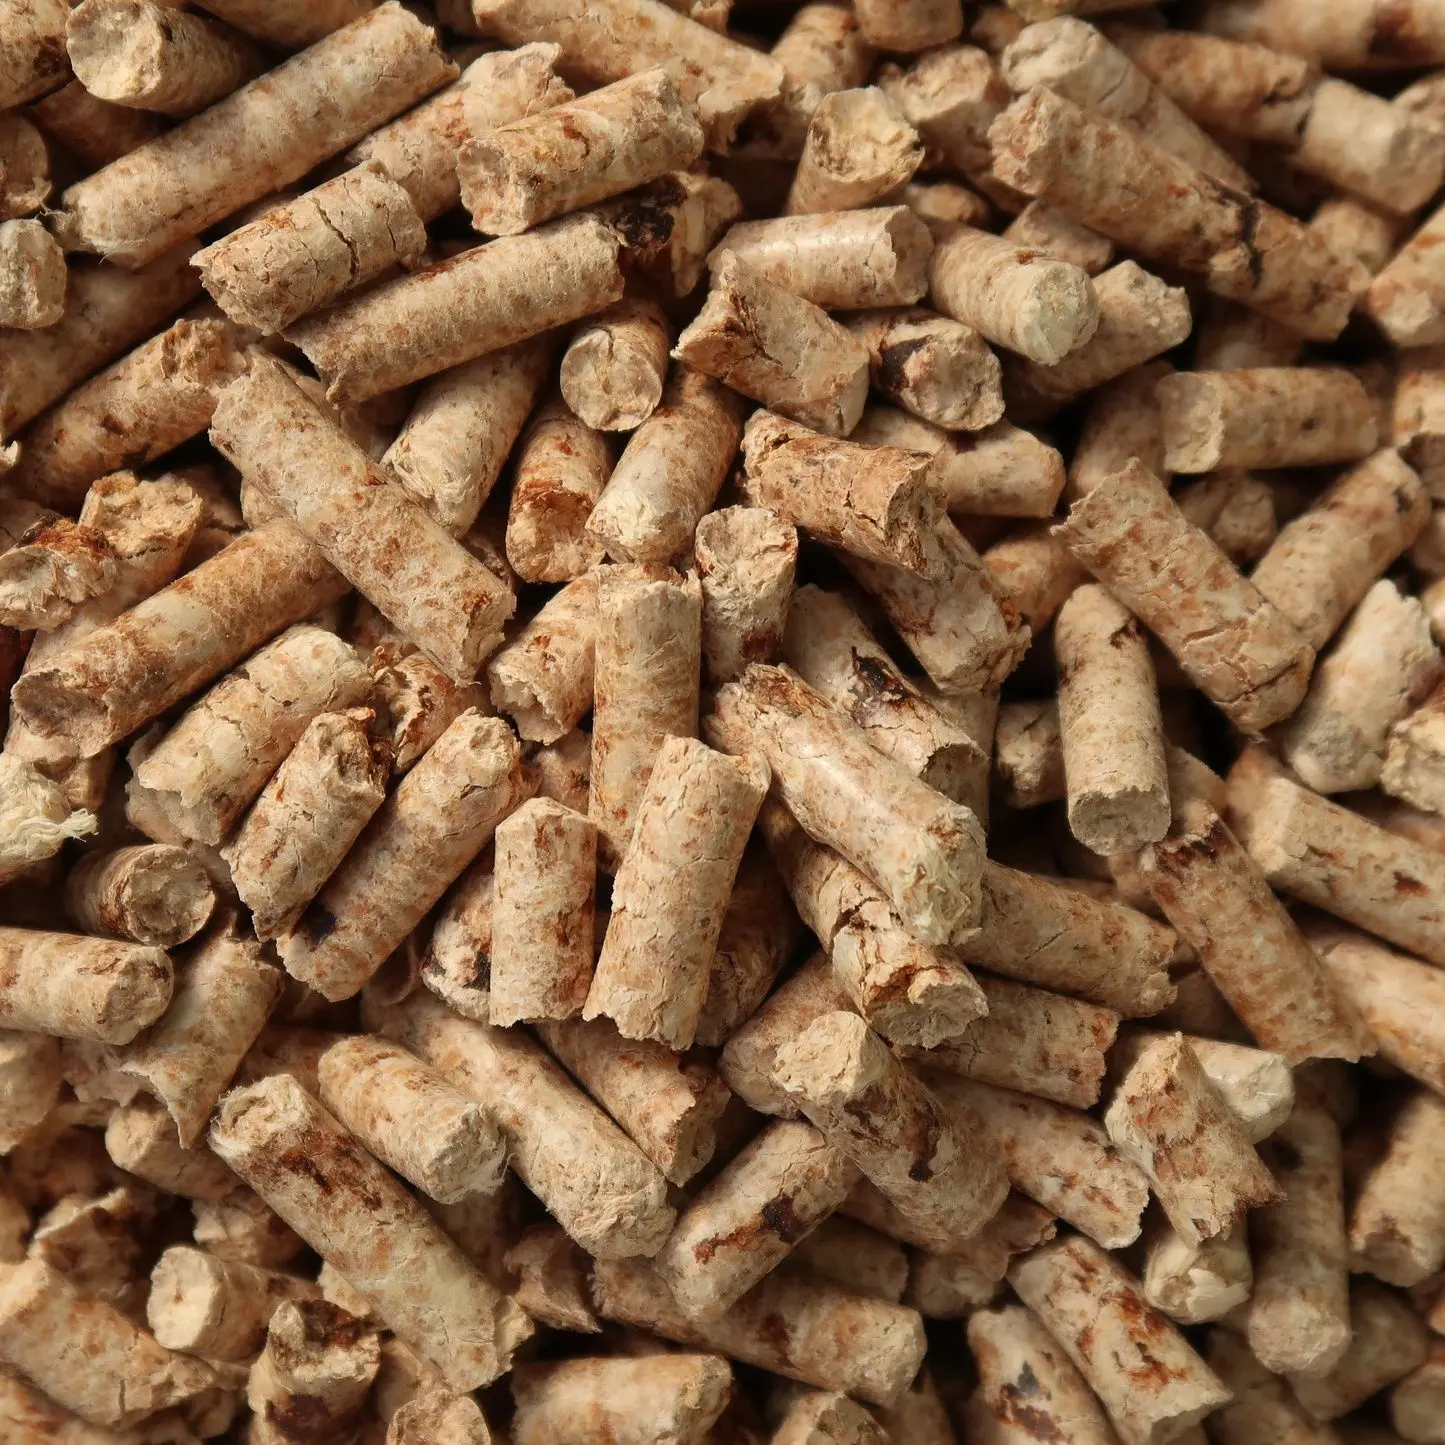 Express delivery Original Premium Wood Pellets EN Plus-A1 Wood Pellet 15kg bags Pellets Premium Pine Wood Available